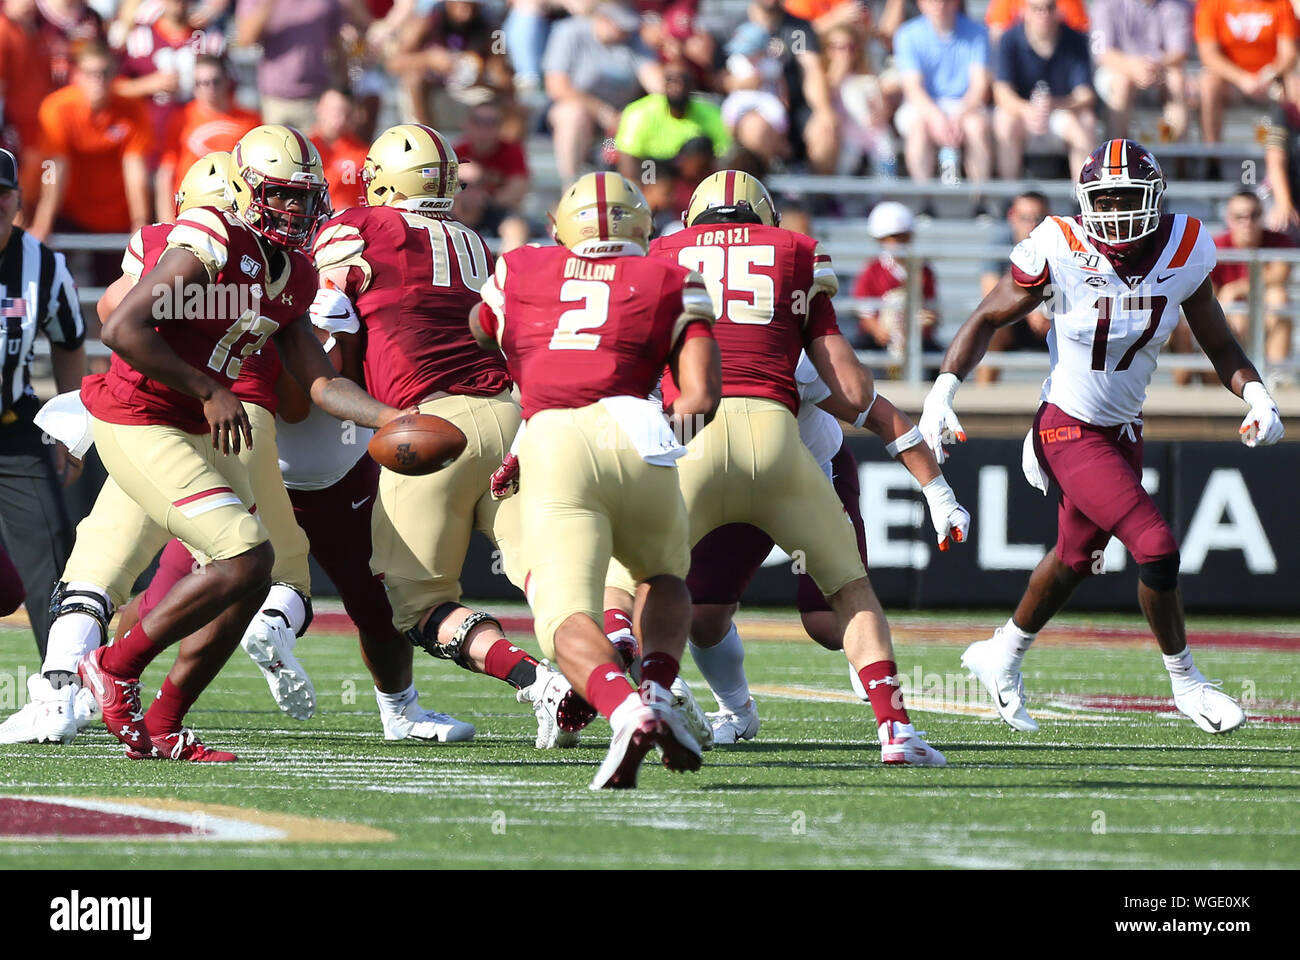 August 31, 2019; Chestnut Hill, MA, USA; Boston College Eagles quarterback Anthony Brown (13) hands off to Boston College Eagles running back AJ Dillon (2) during the NCAA football game between Virginia Tech Hokies and Boston College Eagles at Alumni Stadium. Anthony Nesmith/CSM Stock Photo